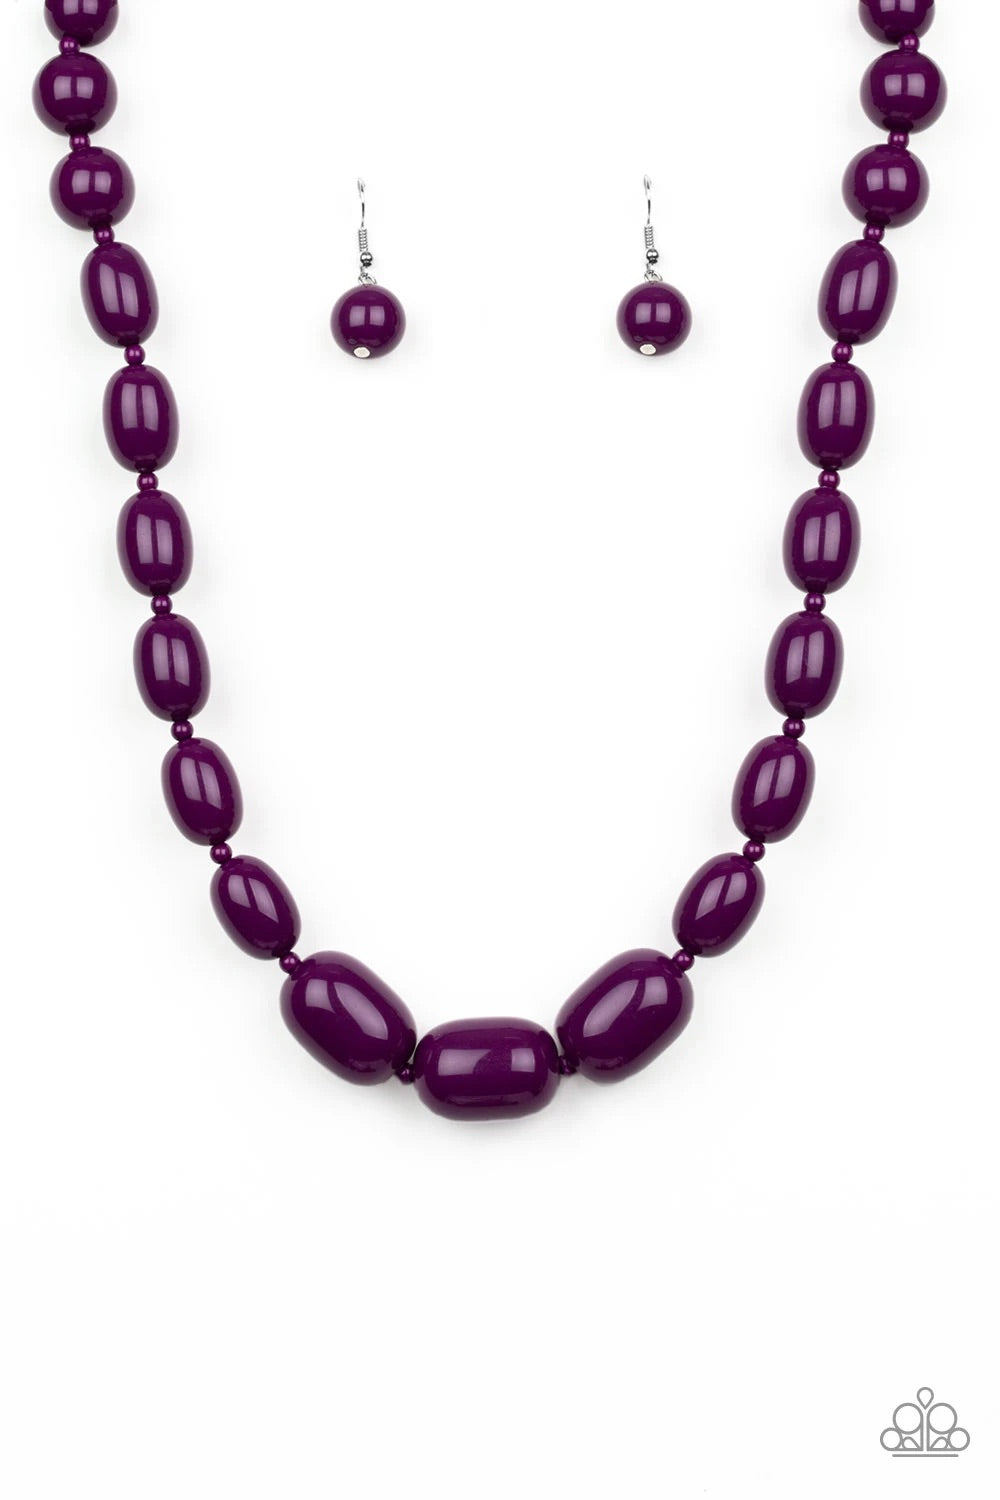 Poppin’ Popularity Purple-Necklace